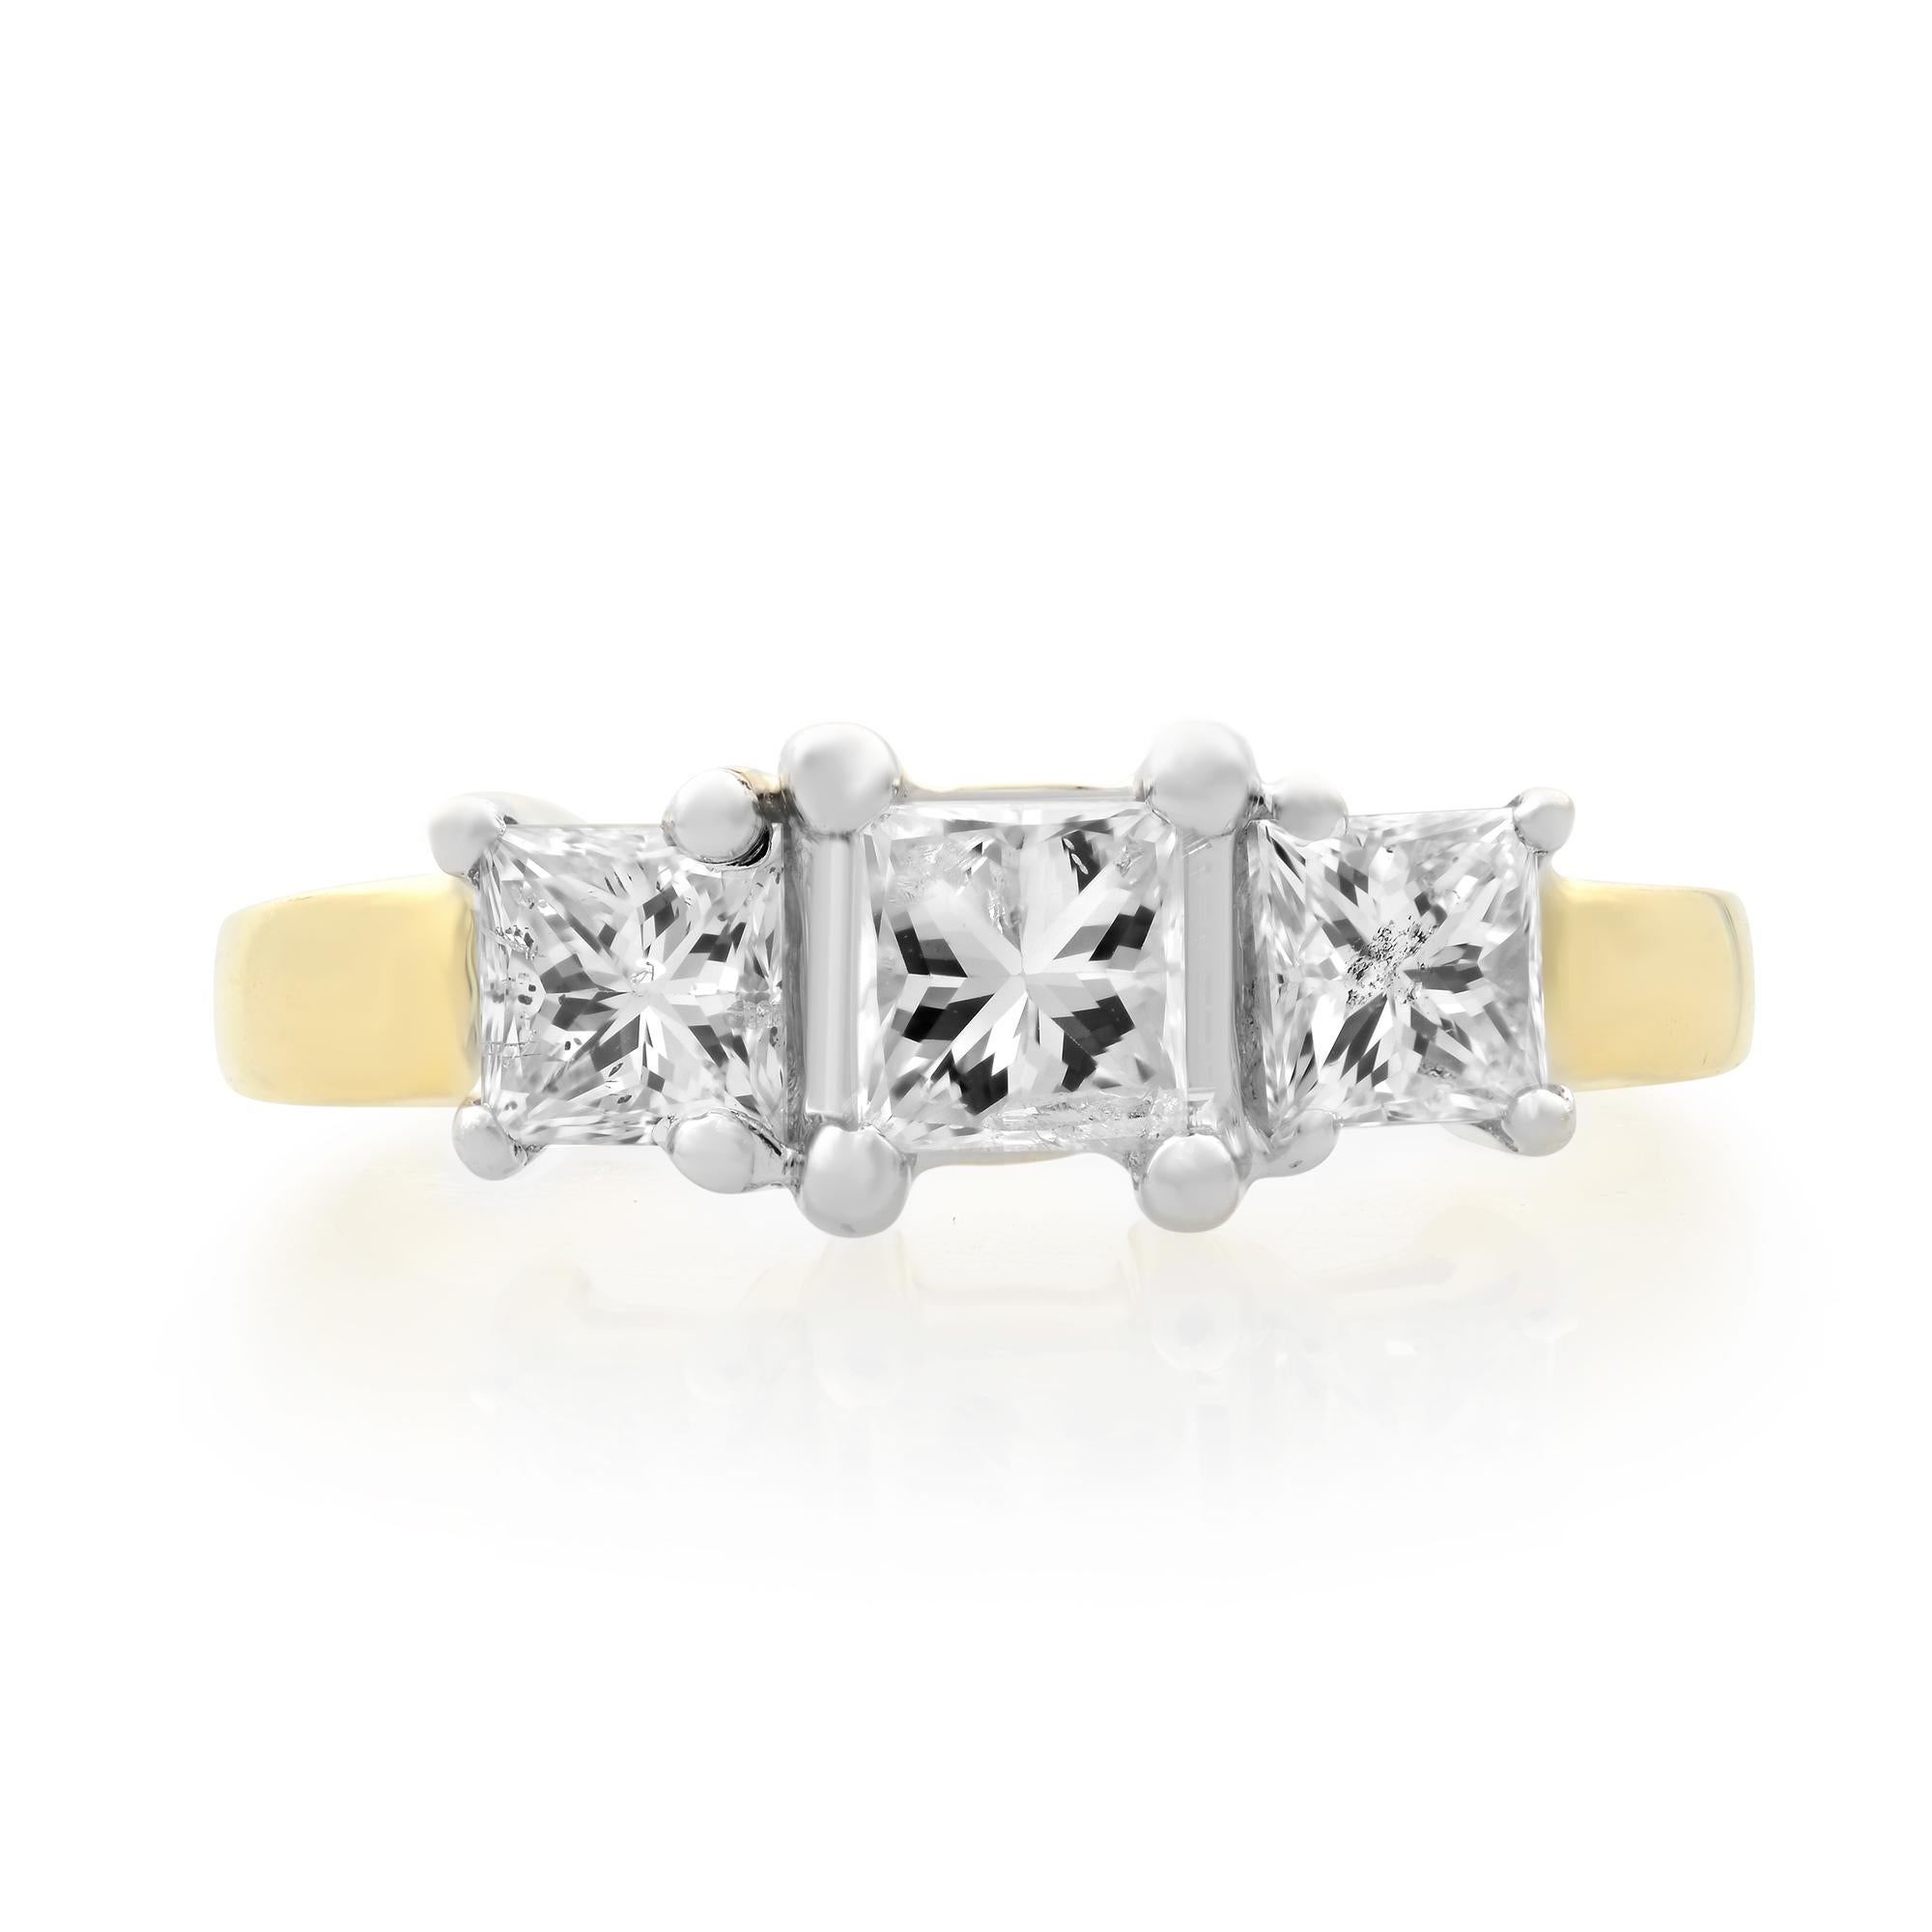 This classic three stone  engagement ring features three princess cut natural diamonds. All diamonds are set in 14k yellow gold. 1.00 carat total diamond weight. Ring Size 7. Diamond Cut: Princess. Color J and SI2 clarity. Weight: 3.60 grams. Comes